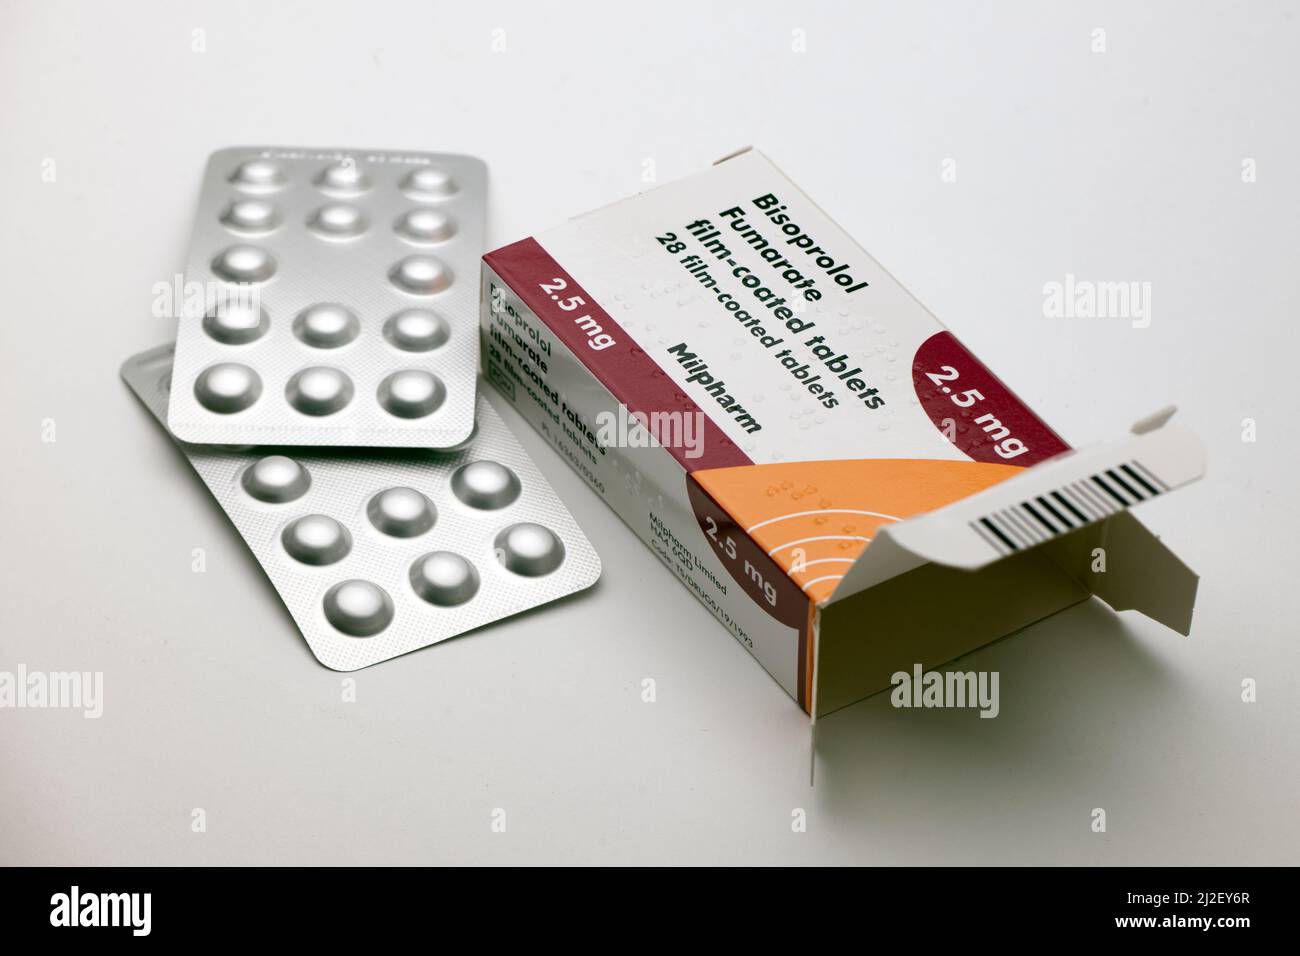 Box of 28 2.5 Bisoprolol Fumarate film coated Tablets Stock Photo